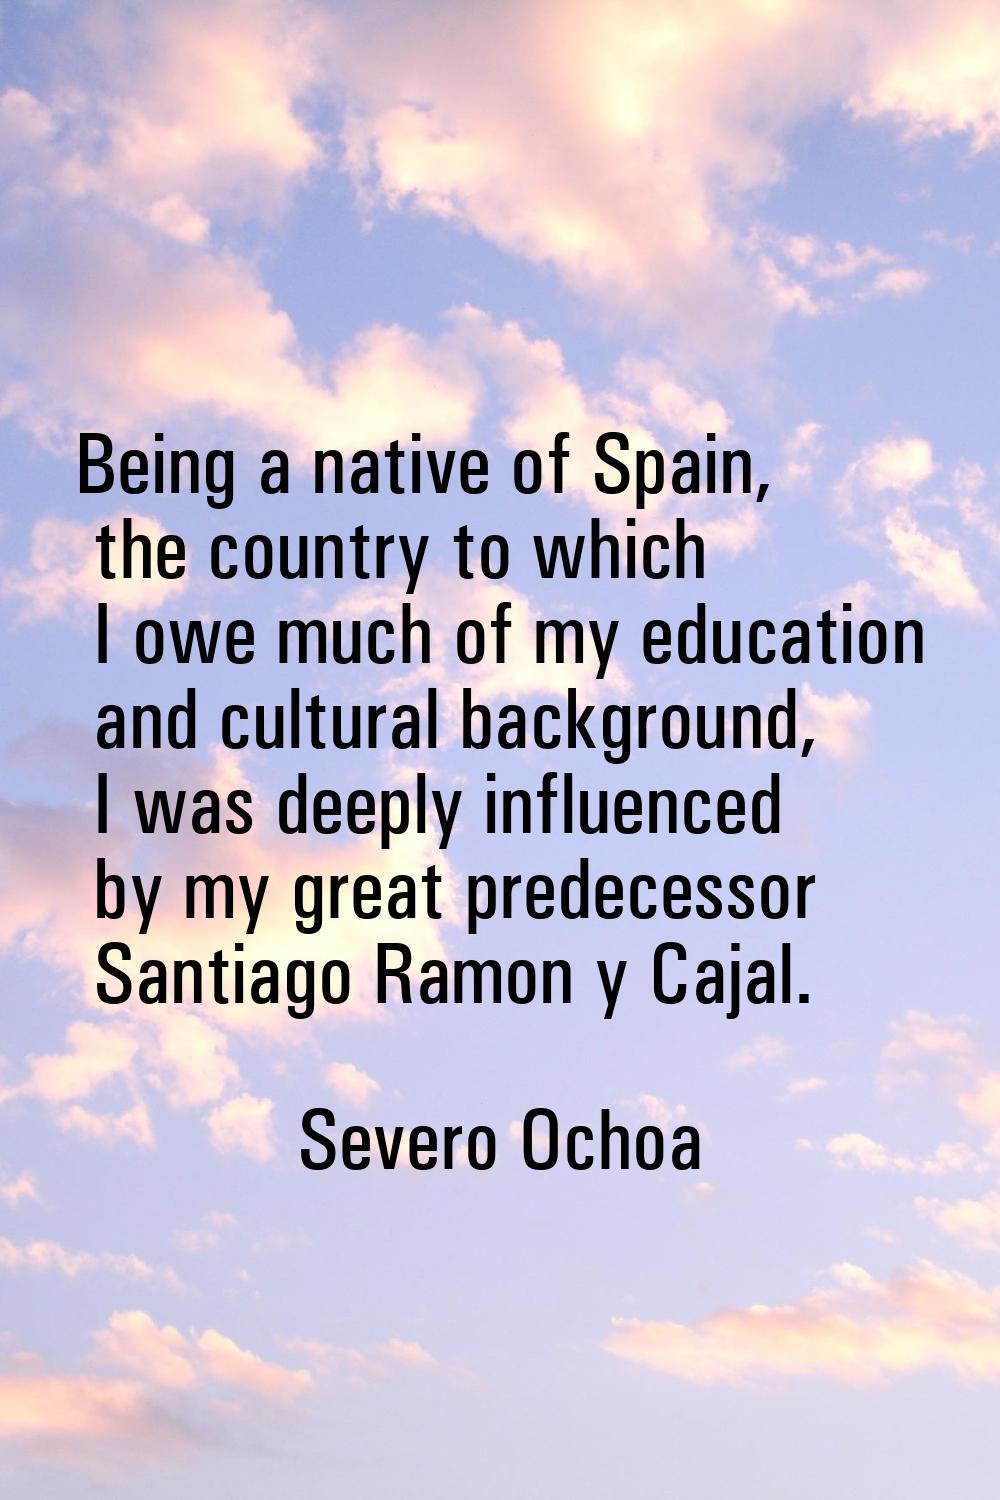 Being a native of Spain, the country to which I owe much of my education and cultural background, I